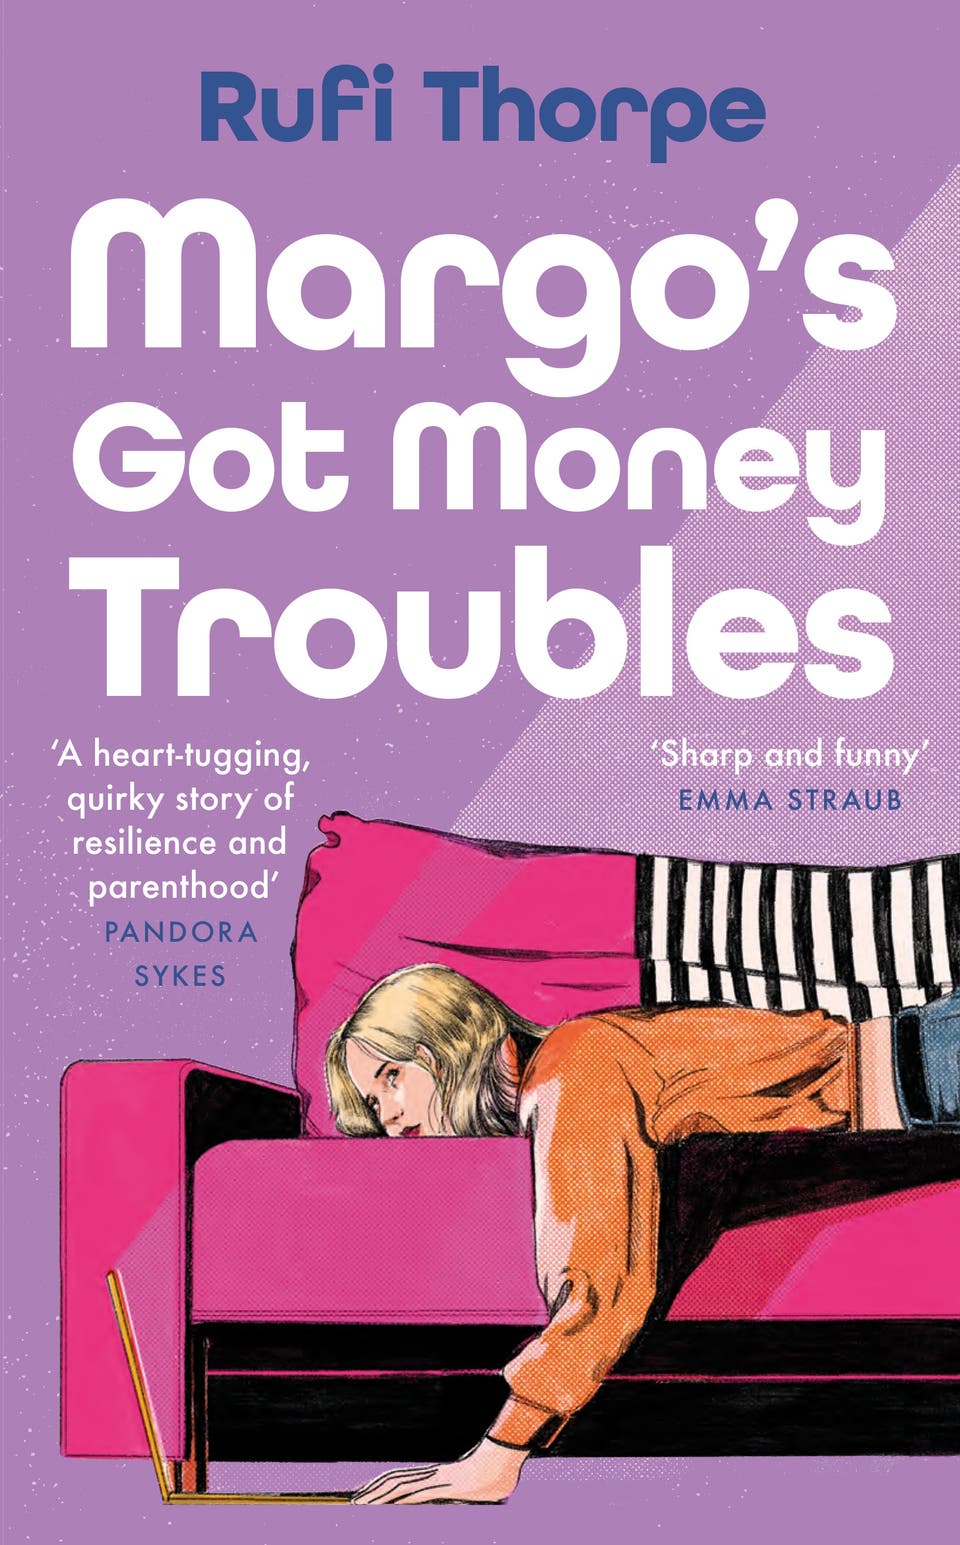 Margo's Got Money Troubles review: OnlyFans, the novel, doesn't work